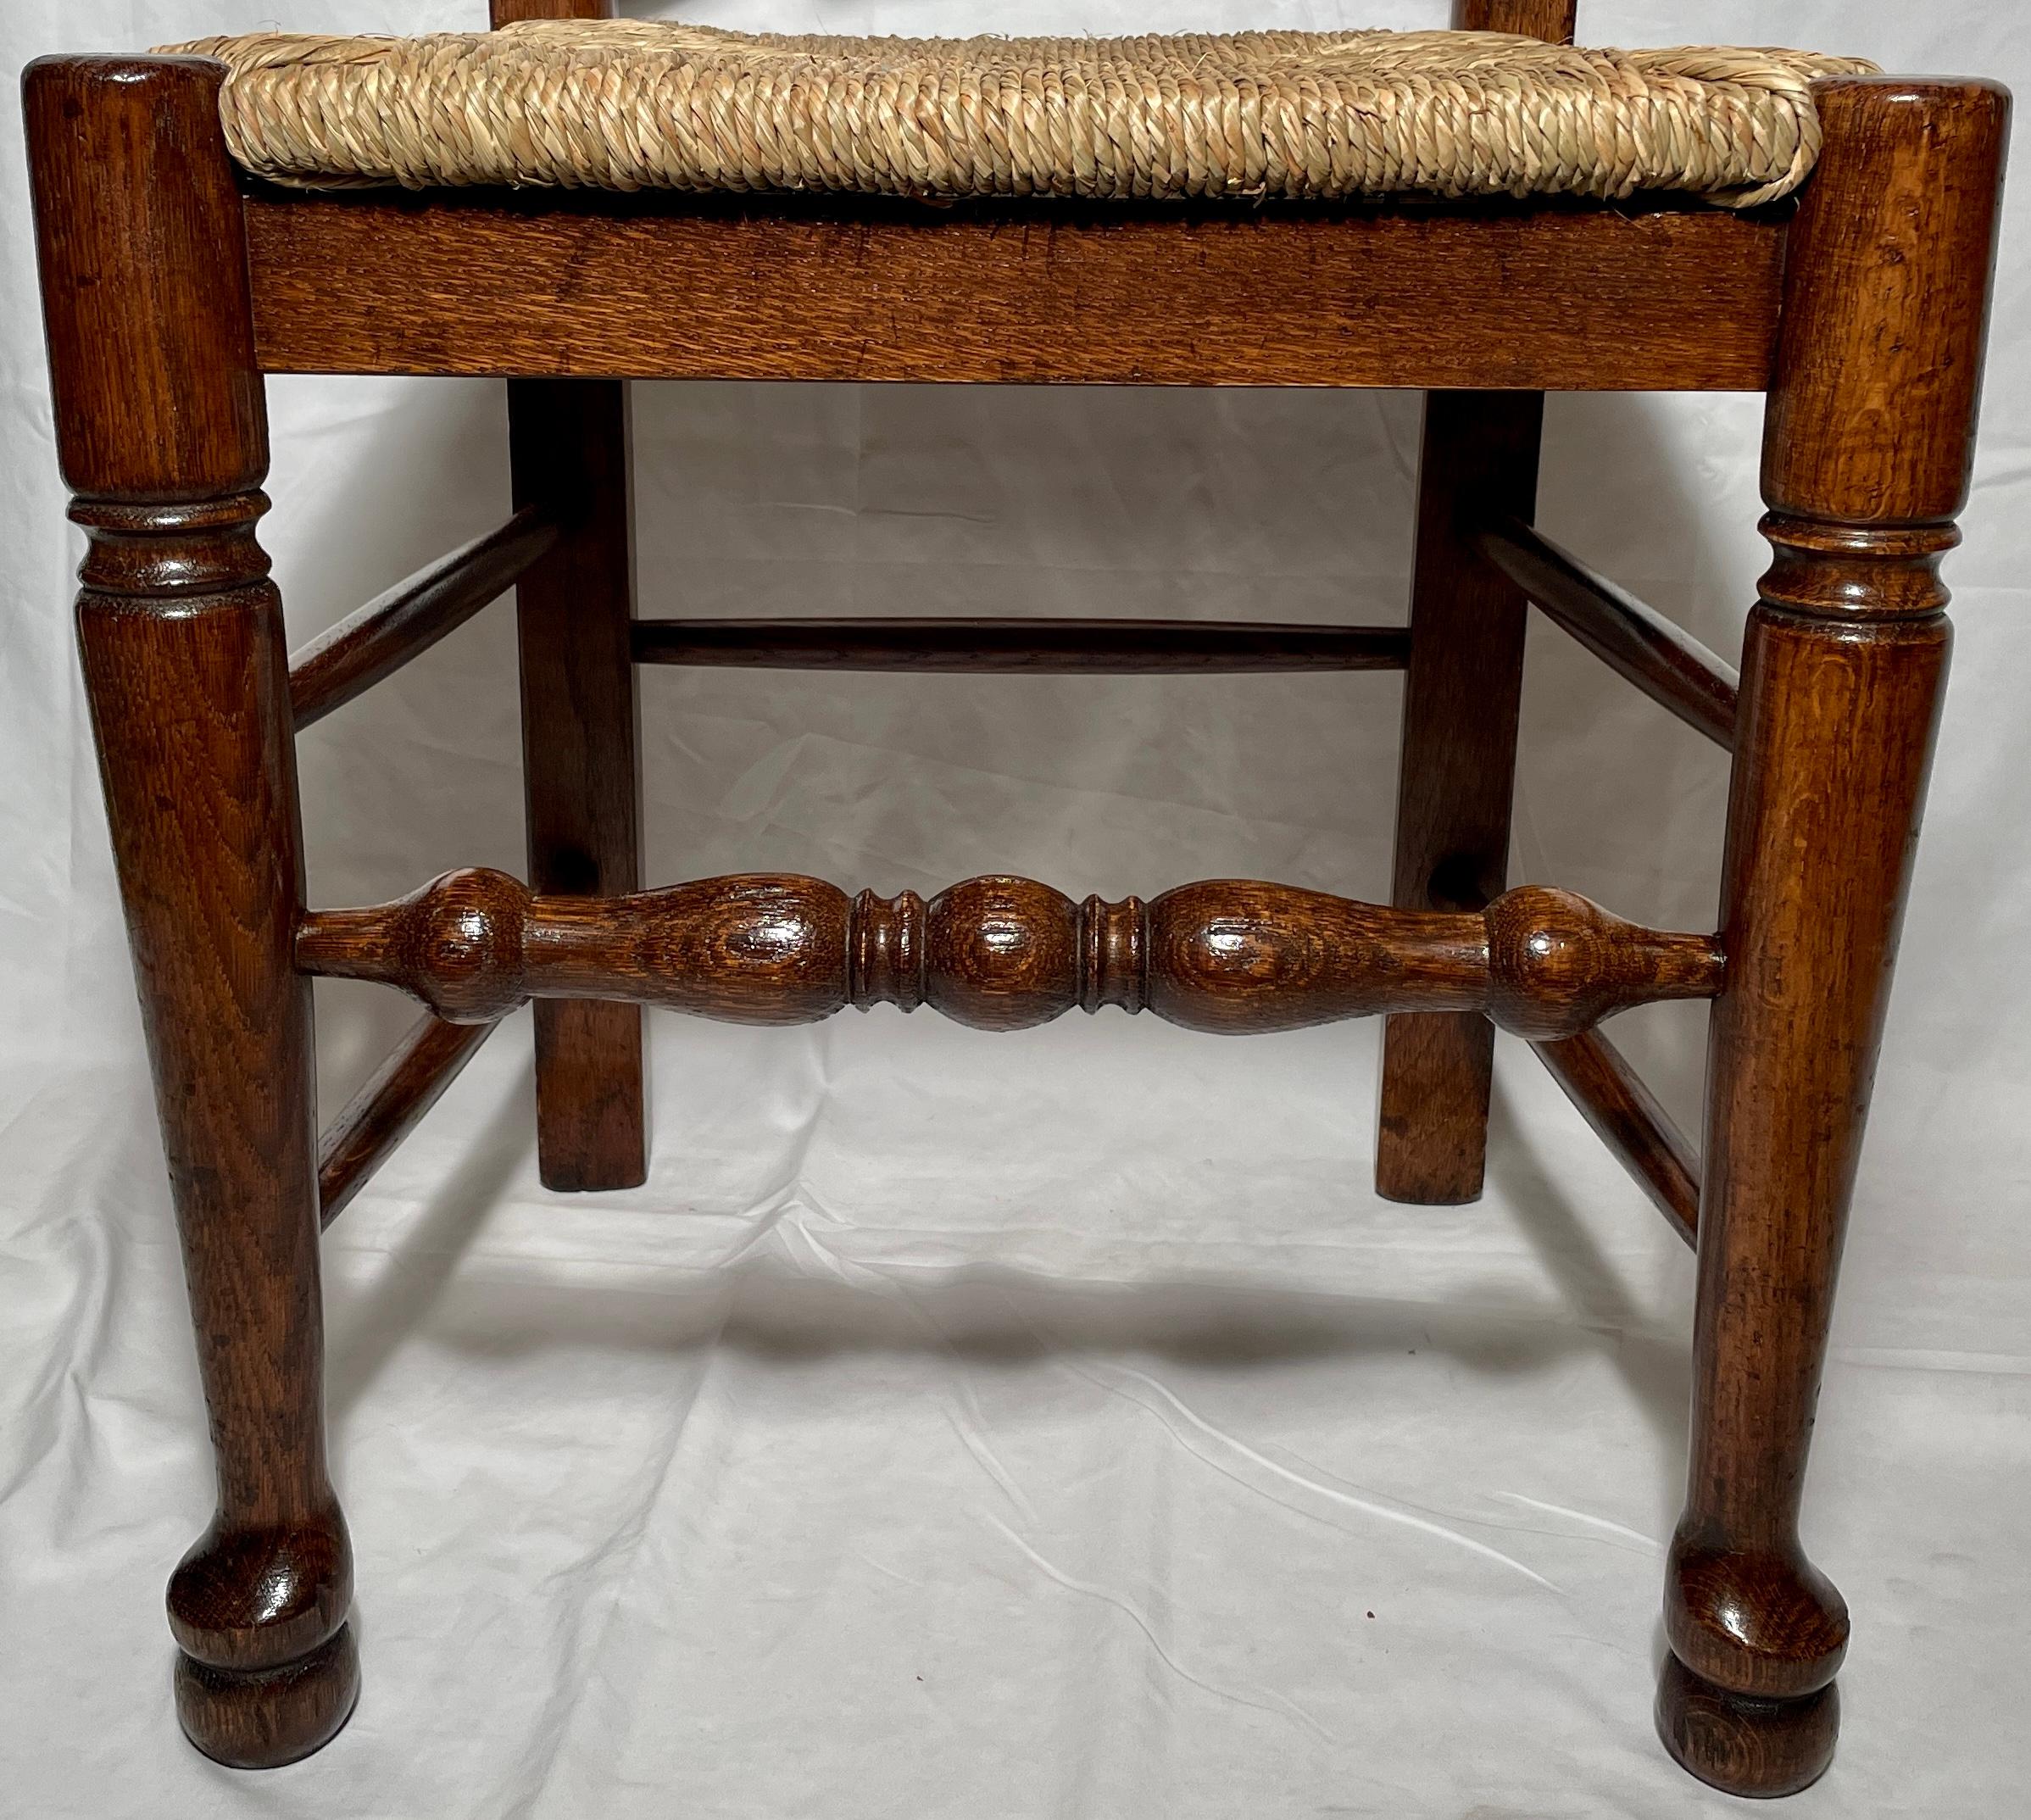 20th Century Set of Ten English Oak Ladder Back Chairs with Rush Seats